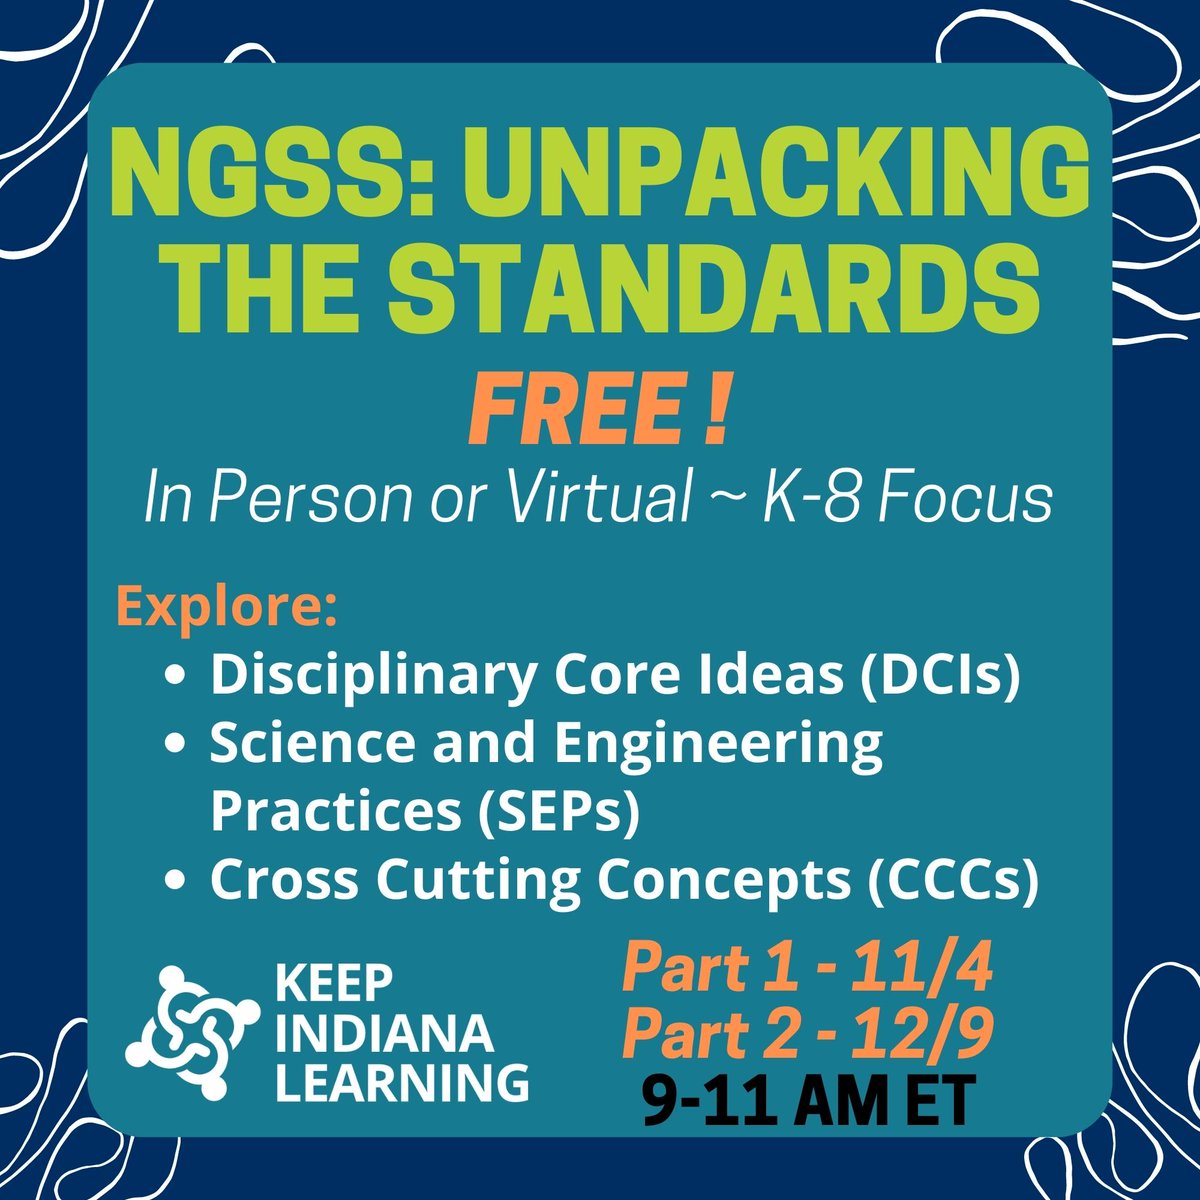 K-8 Science Teachers - this FREE event is for you! Come unpack the new performance expectations for K-8 science classes in Indiana! Learn more & register: keepindianalearning.org/events/ngss-un… #science #STEM